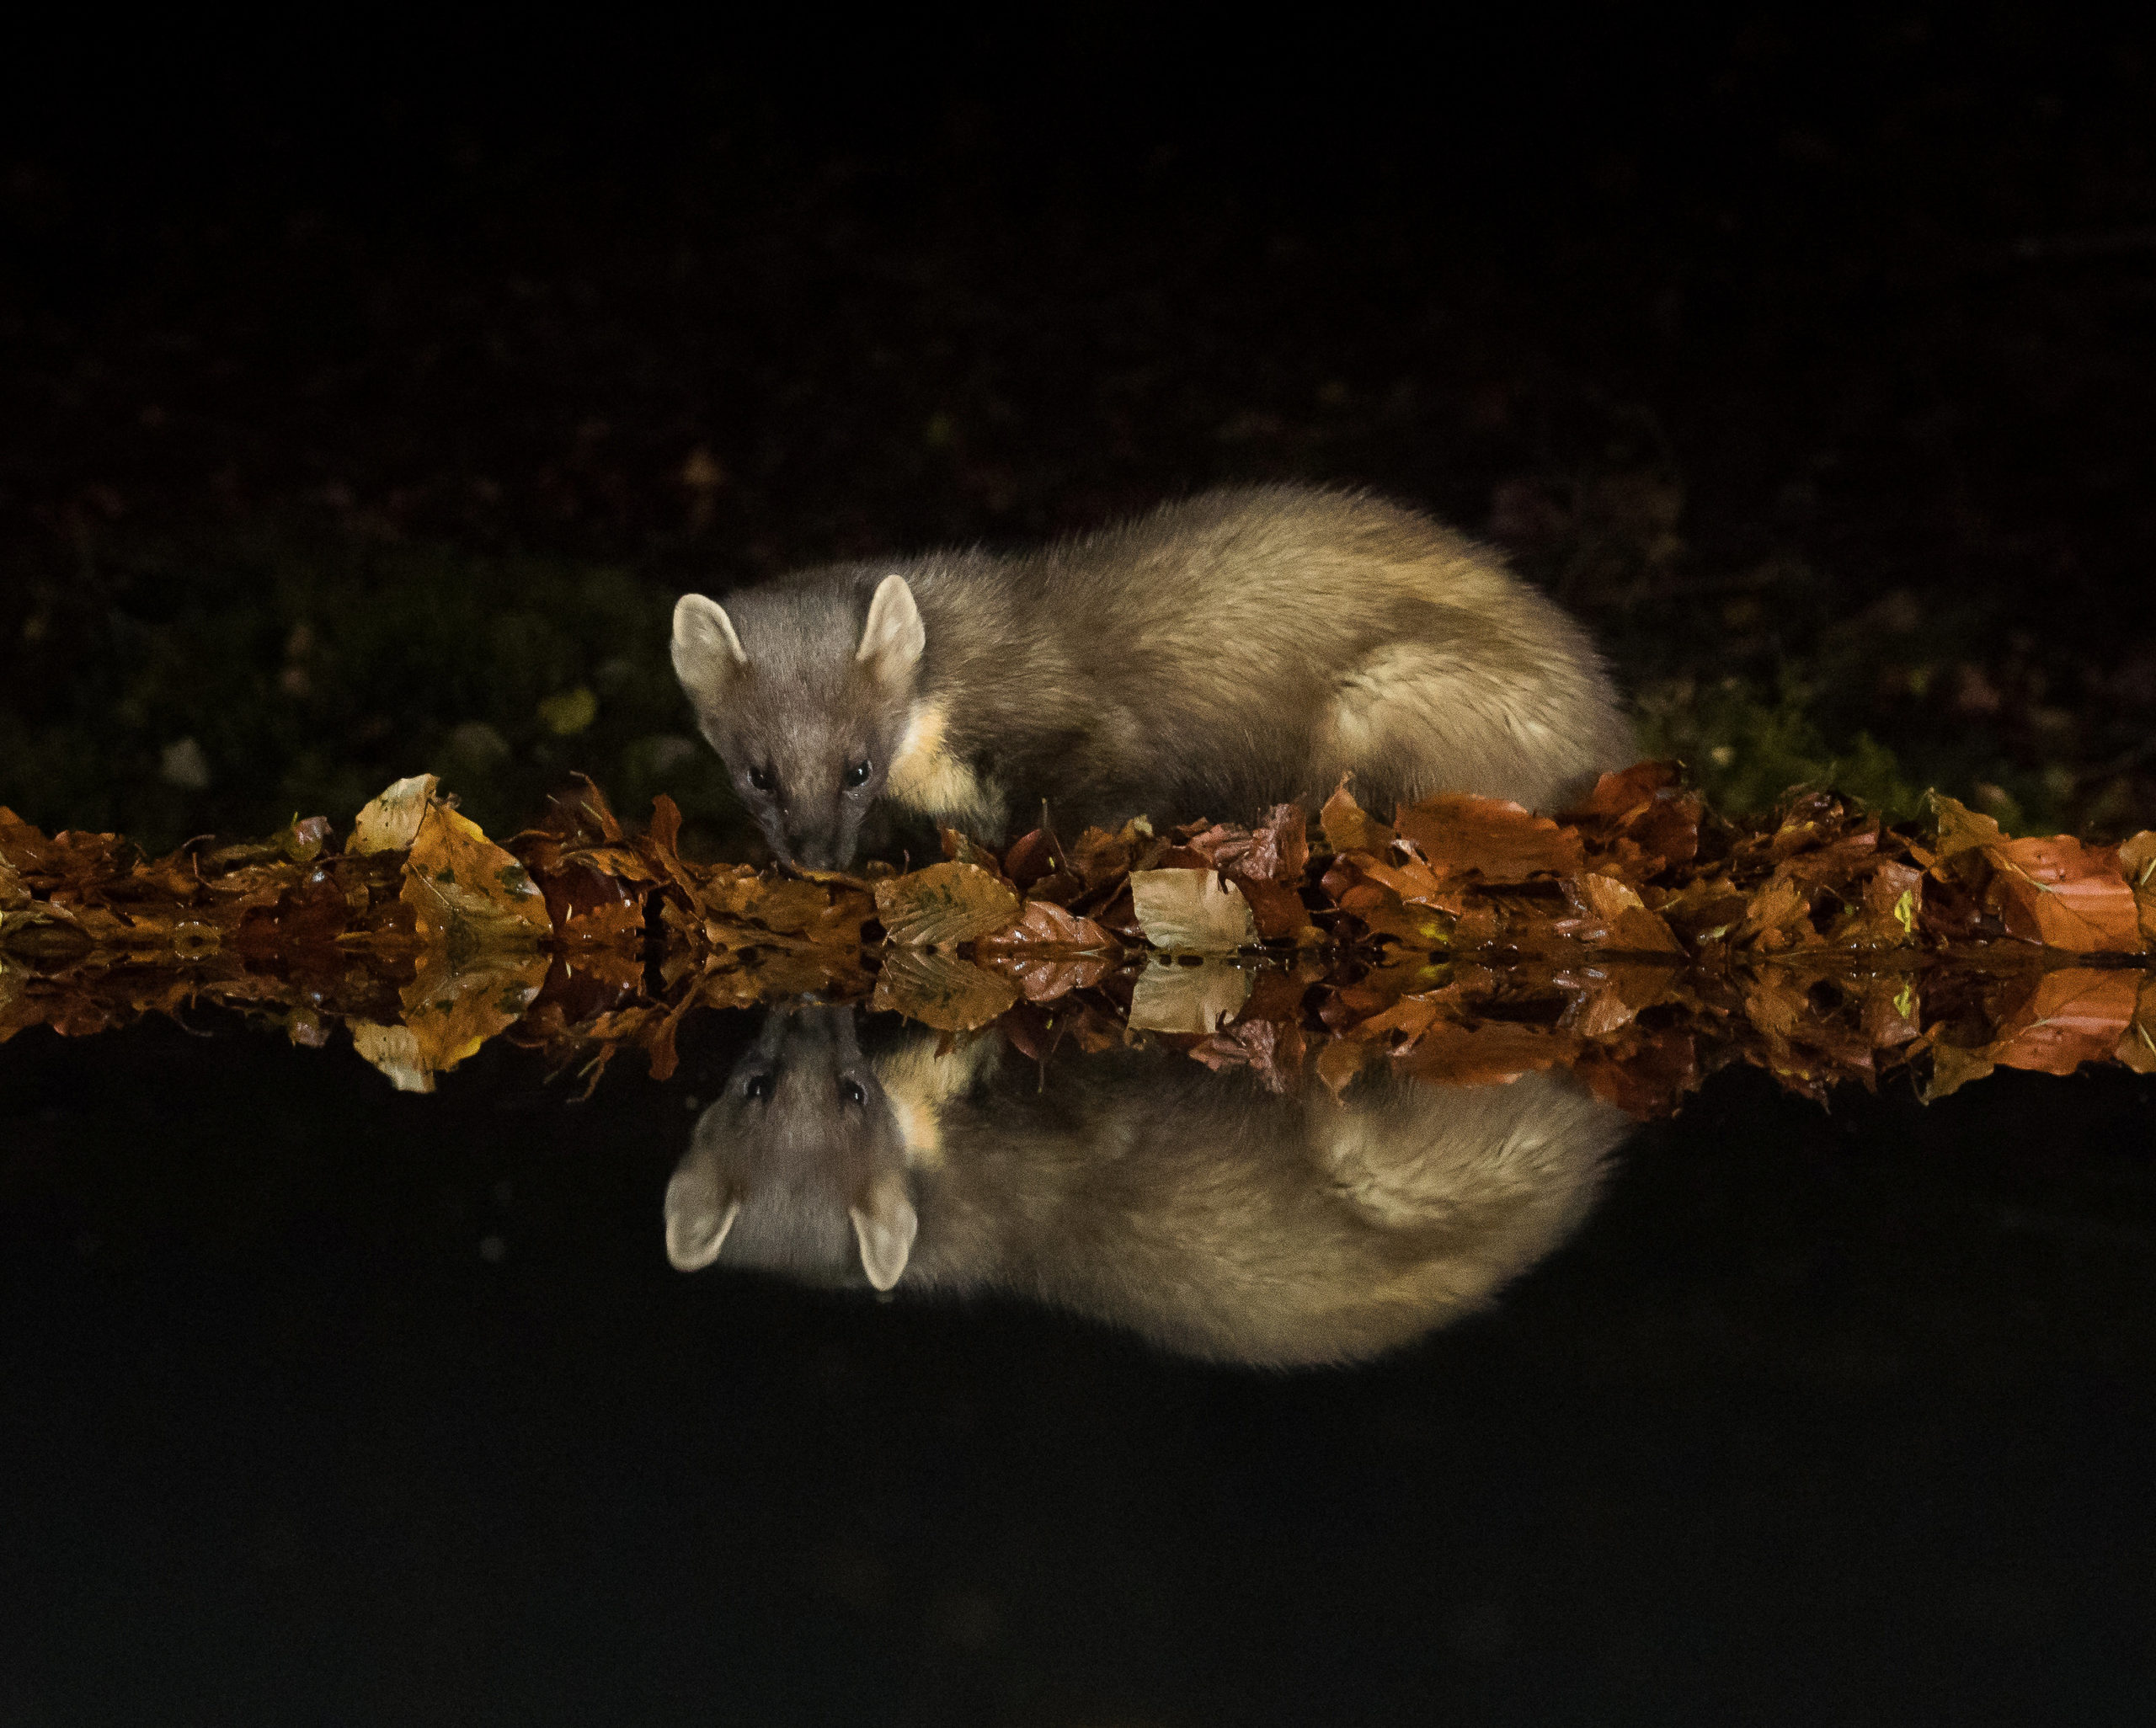 Pine marten looking into its reflection. SWNS.